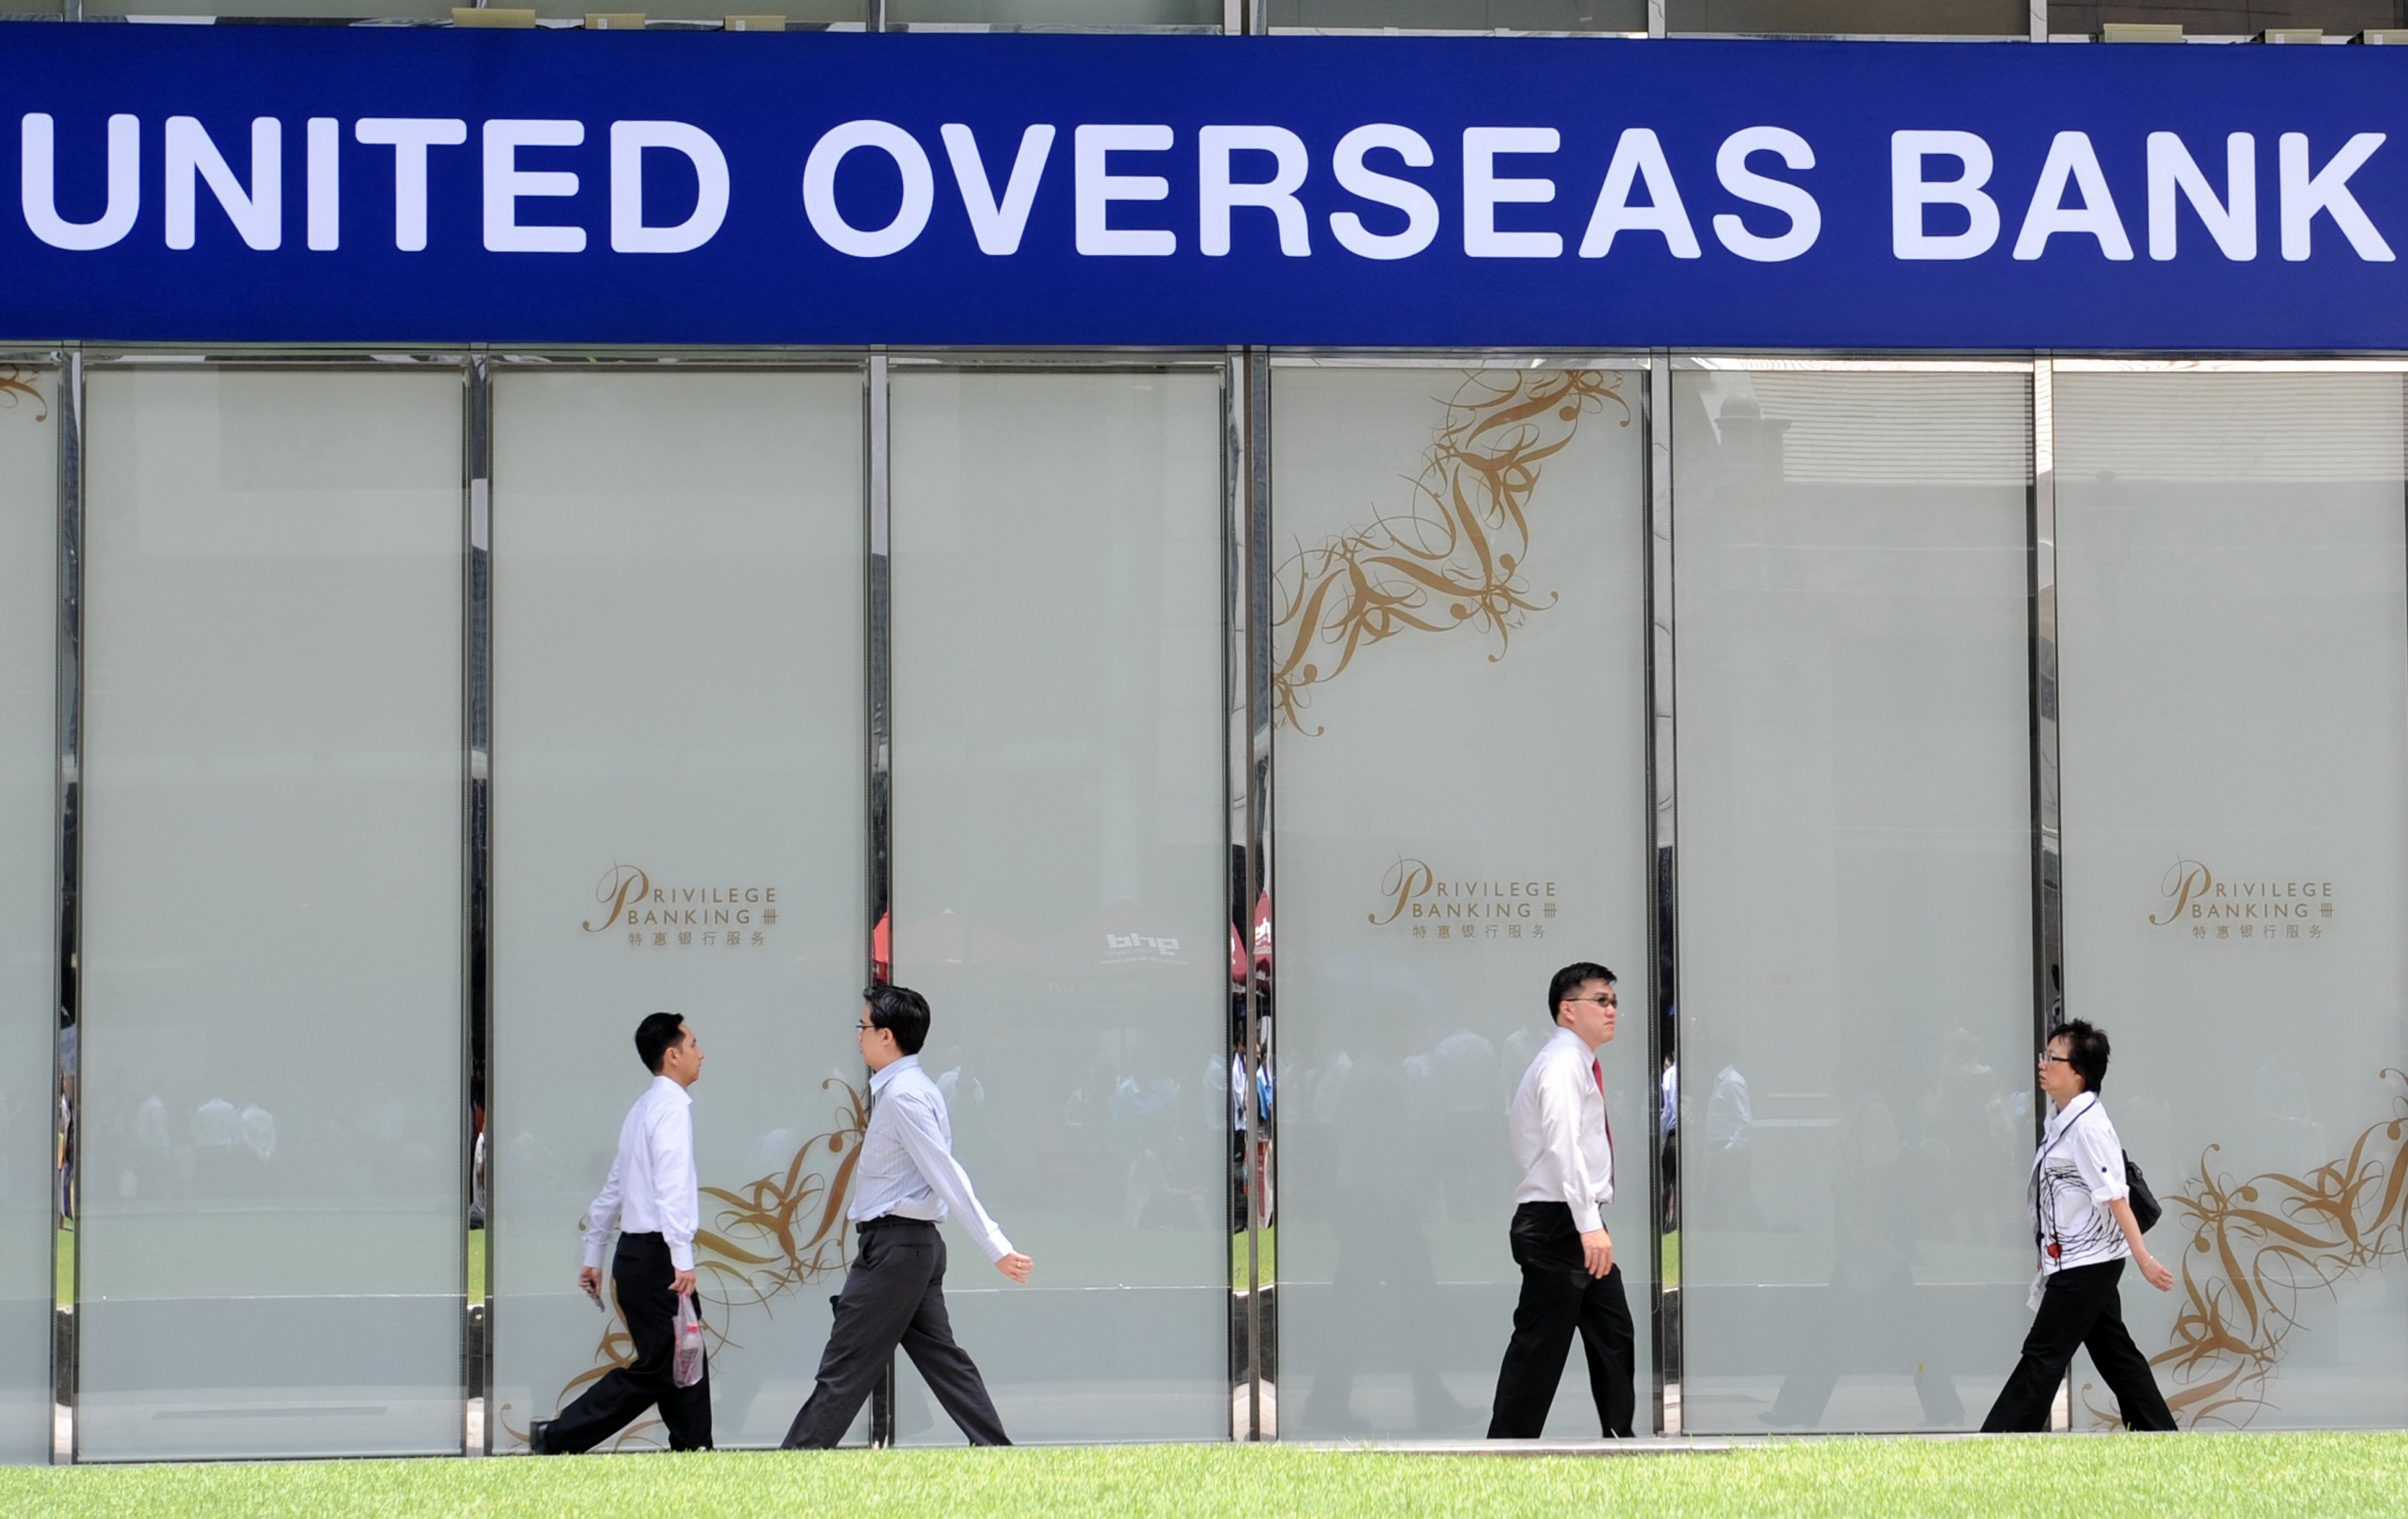 People walk past the local bank branch of the United Overseas Bank in Singapore on September 13, 2010. Banks will be required to lift their reserves substantially under "landmark" new rules drawn up September 12 by central bankers and regulators seeking to prevent a repeat of the recent financial crisis. The new regulations, called Basel III, would force banks to more than triple their current reserves and would be phased in from 2013, said a statement issued by the Bank for International Settlements in Zurich. AFP PHOTO / ROSLAN RAHMAN / AFP PHOTO / ROSLAN RAHMAN